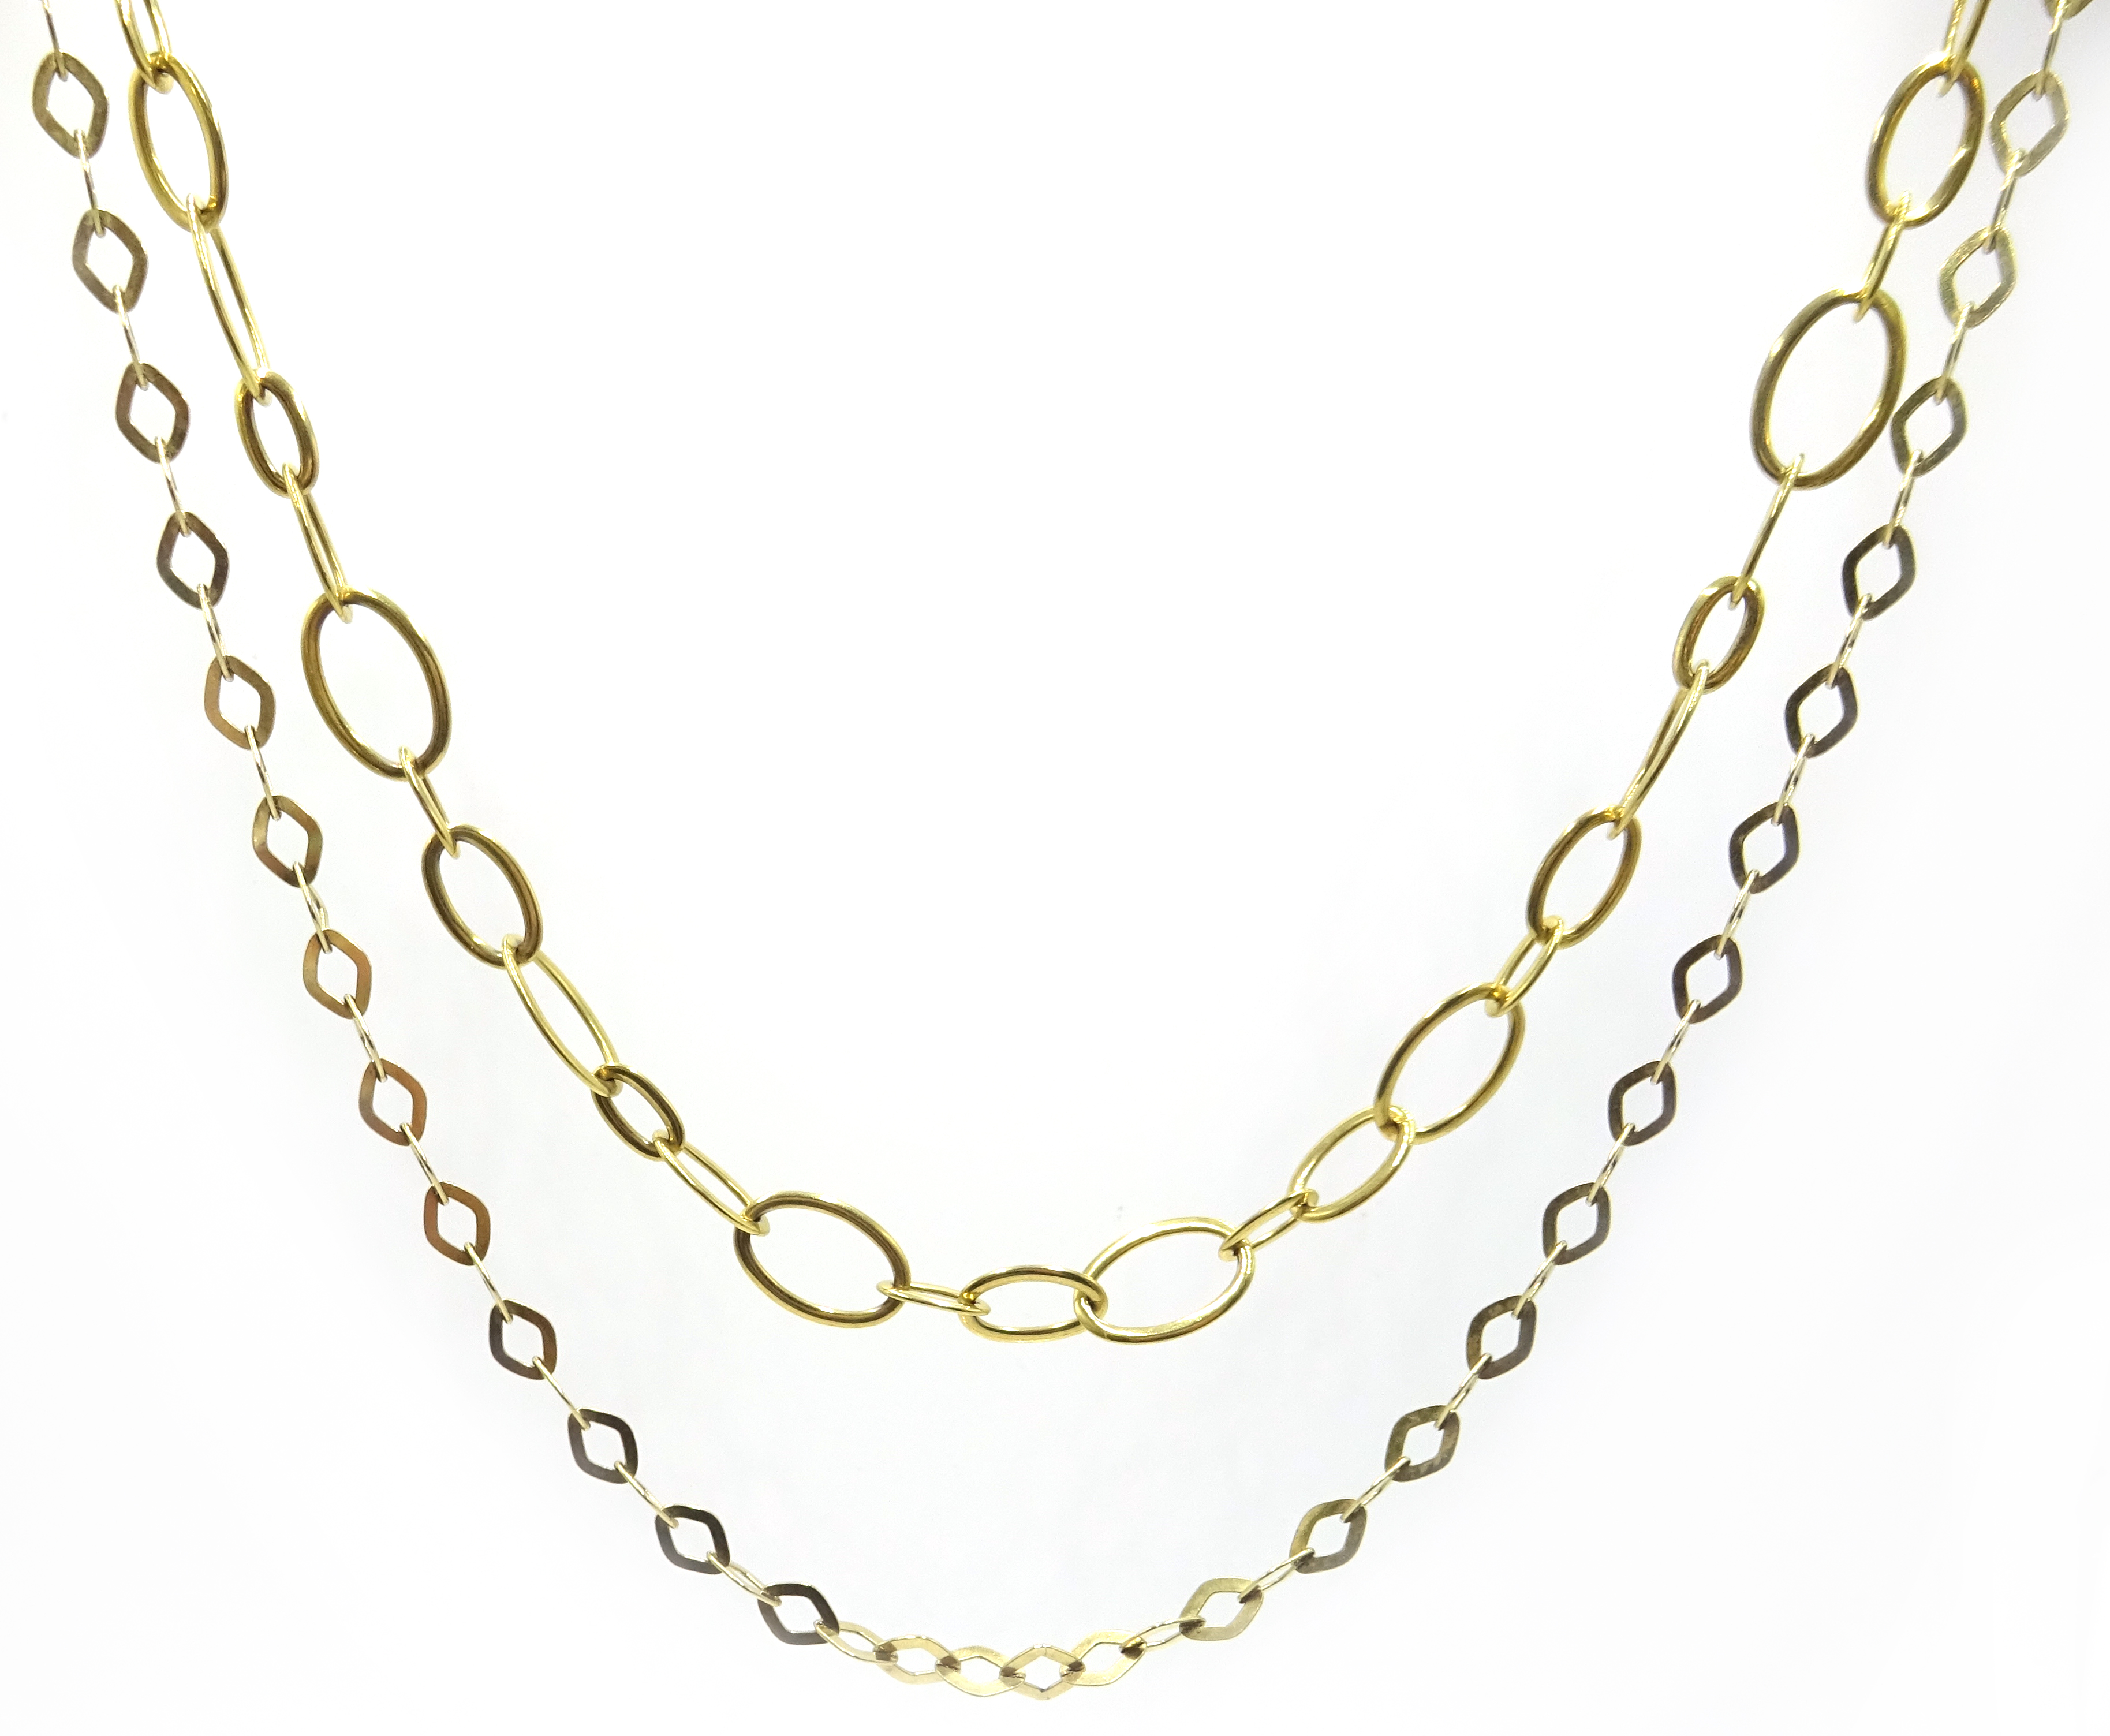 Stone set pendant on 9ct gold necklace chain, hallmarked and silver-gilt double chain necklace, - Image 2 of 5